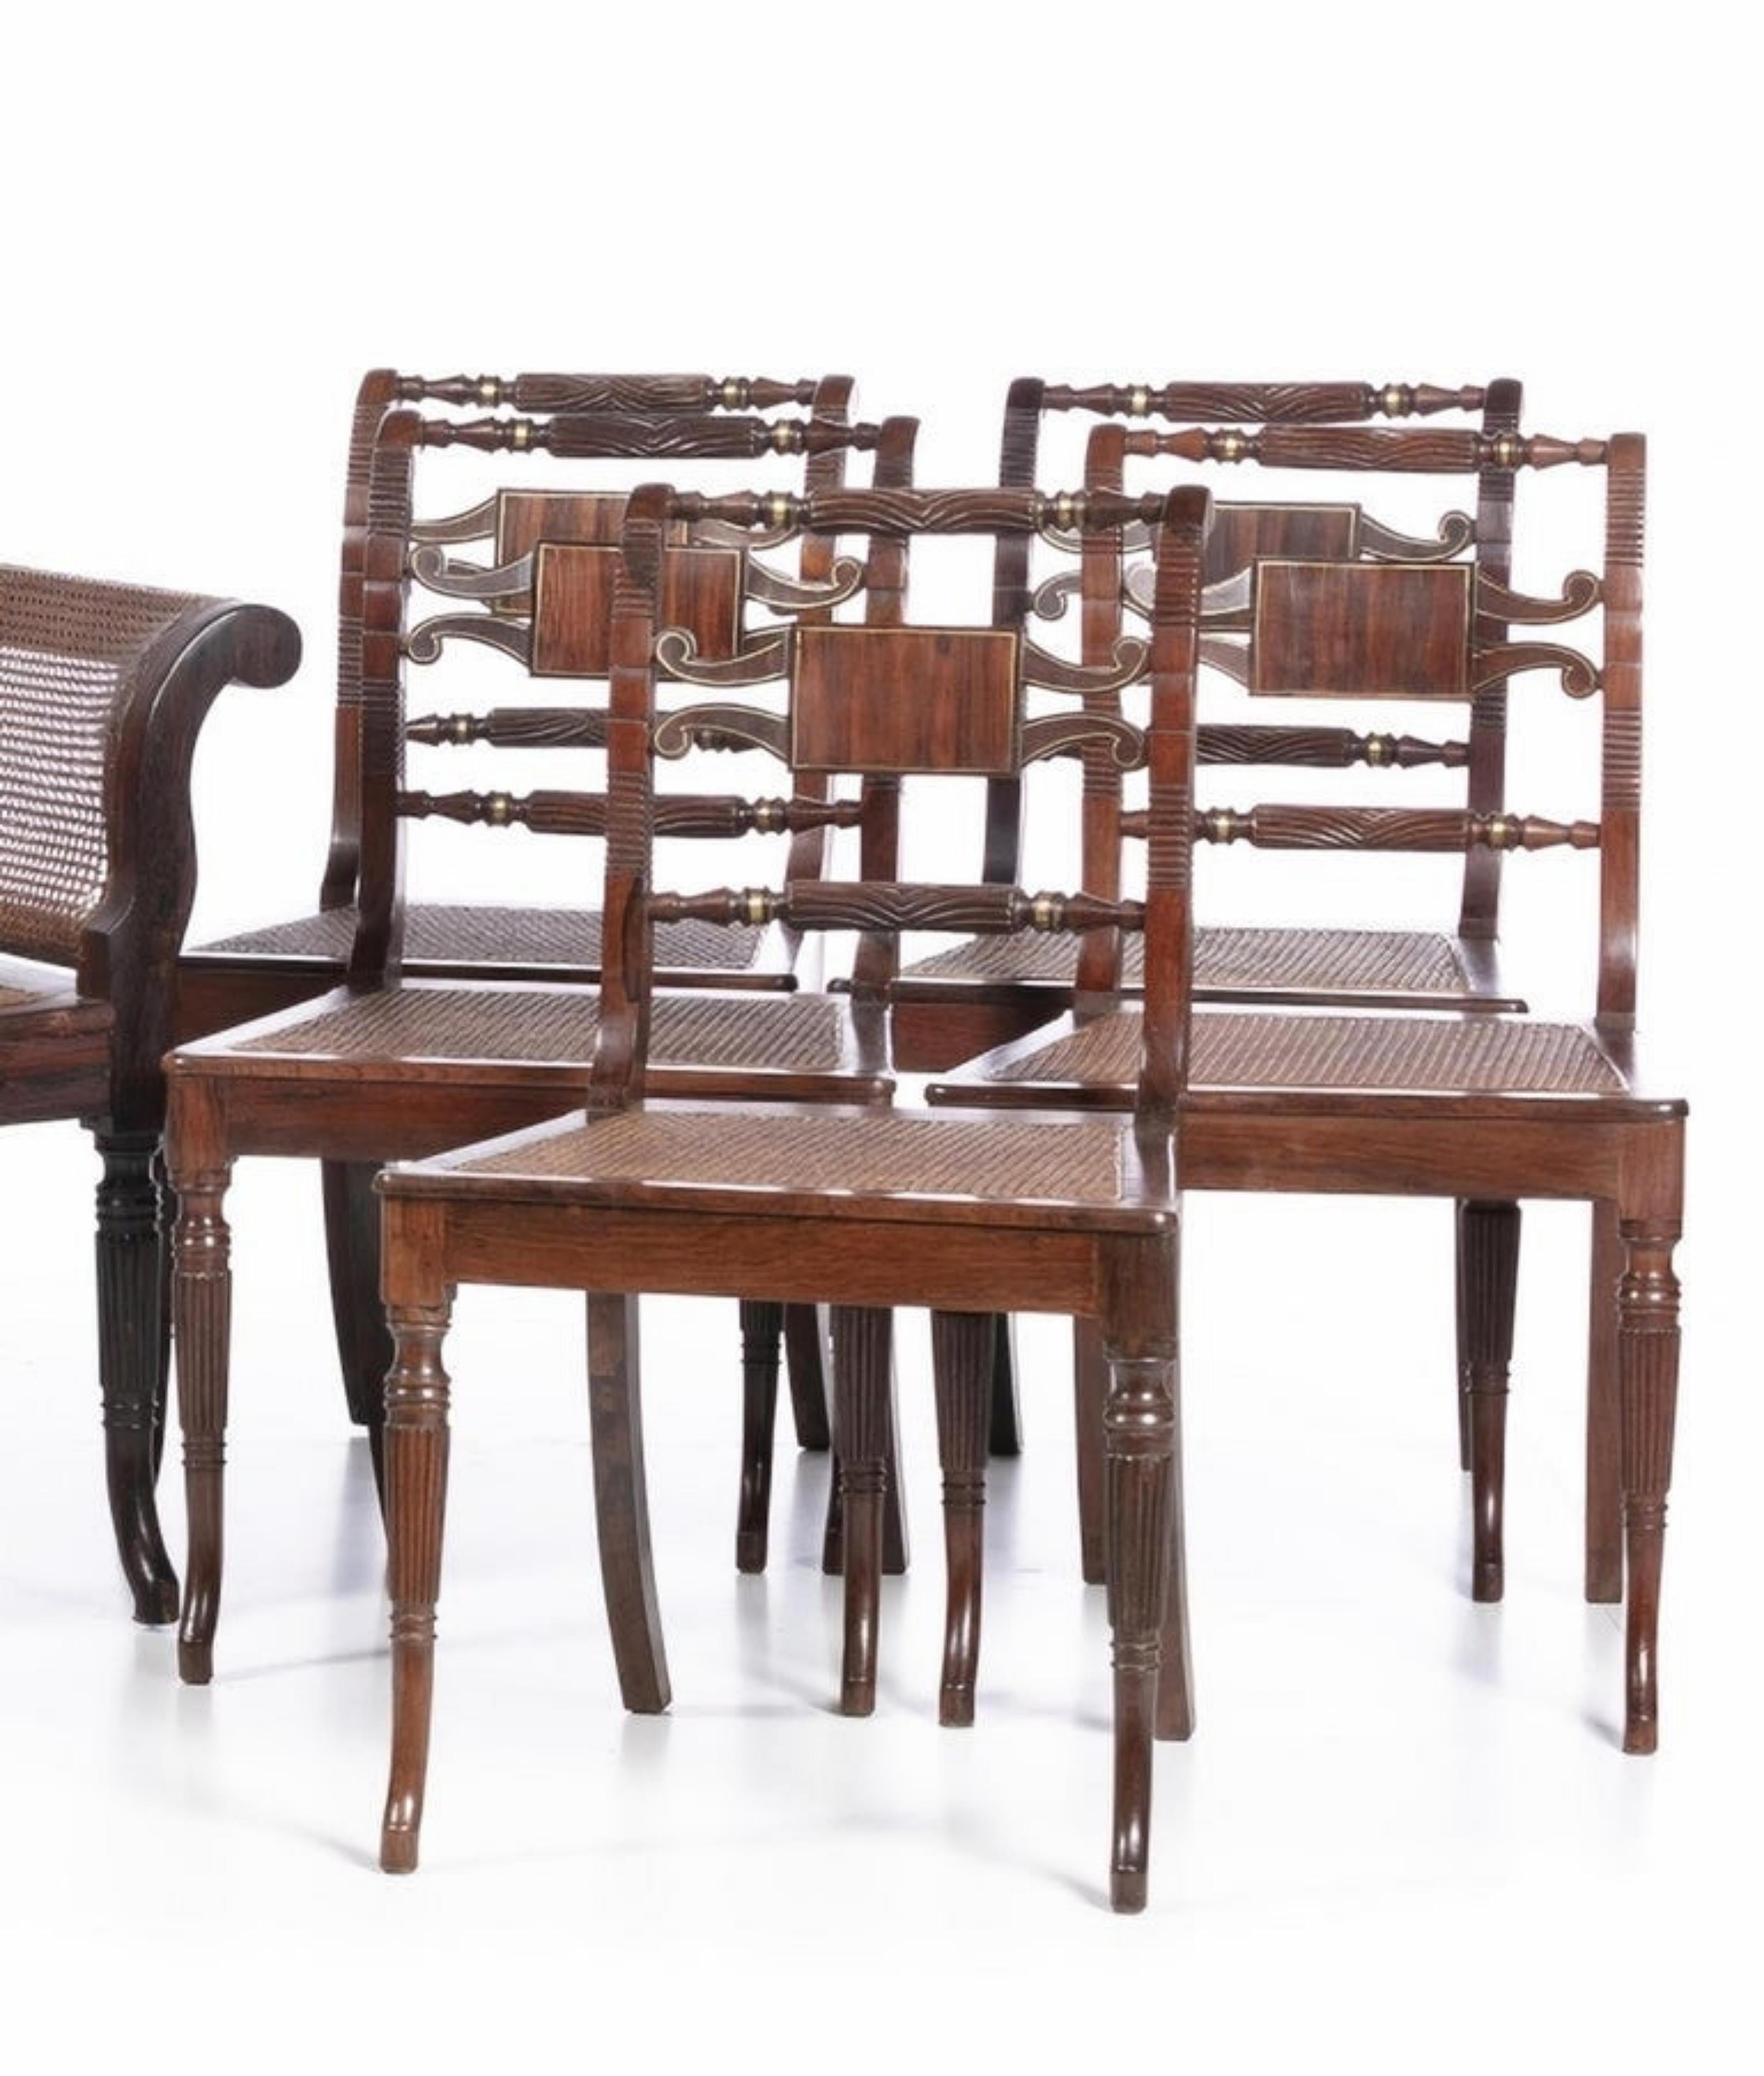 Canape and 5 chair set
Regency
From the 19th century,
In rosewood wood with curved roller arms, and metal applications.
Straw seats.
Dimensions.: (canapé) 87 x 175 x 83 cm.
Dimensions.: (chair) 85 x 50 x 40 cm.